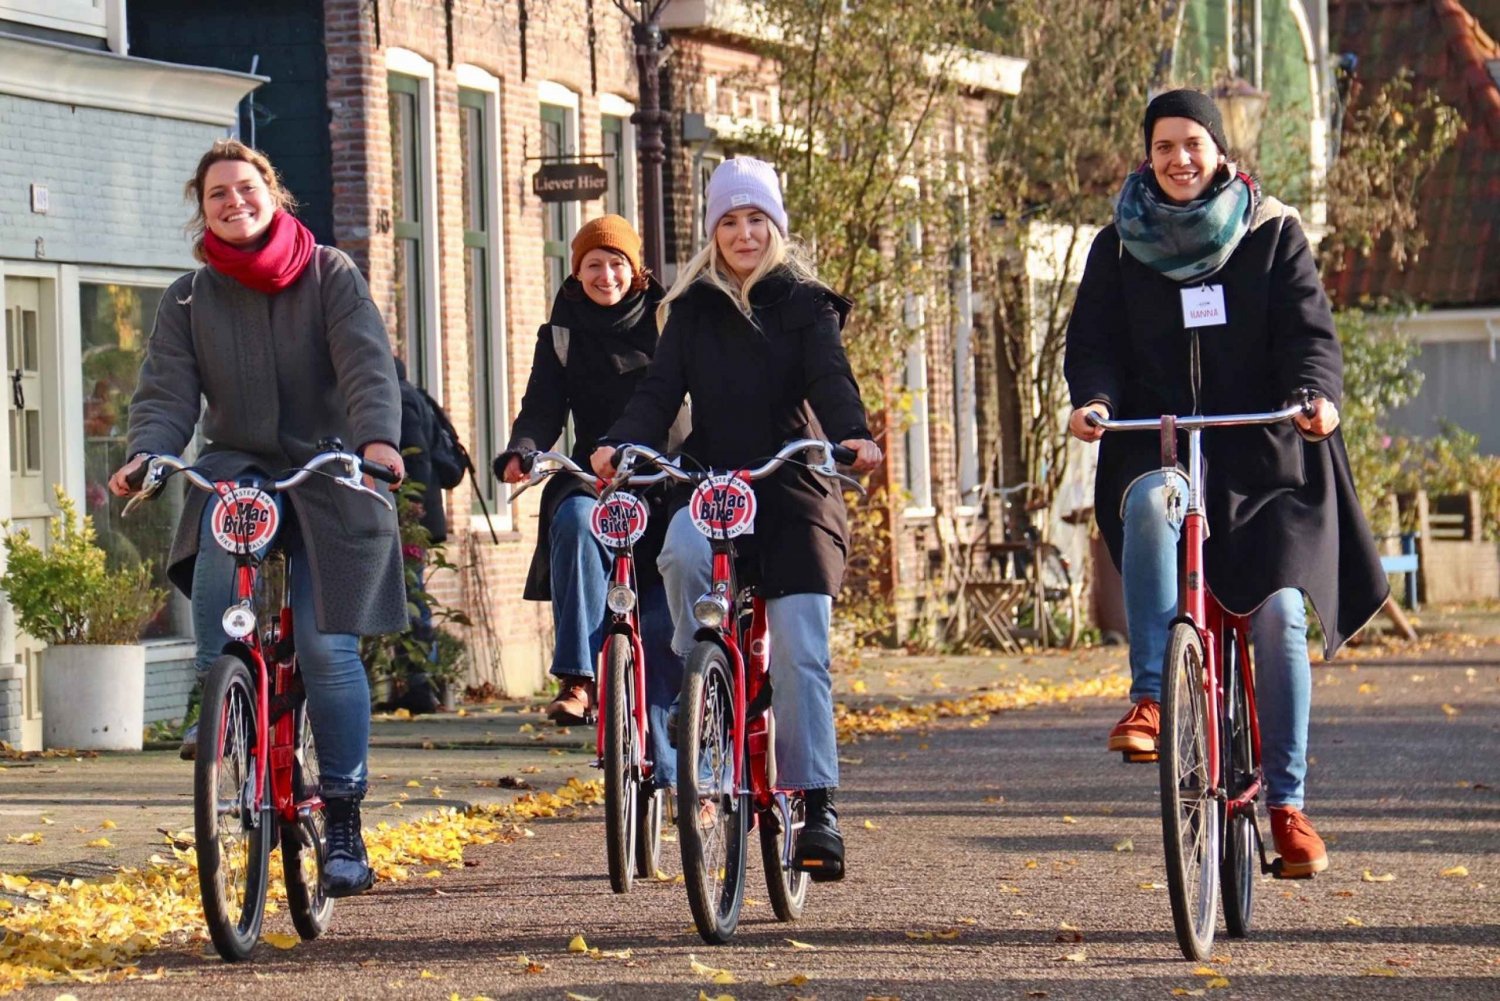 Amsterdam: Tour in bicicletta (Noord) in tedesco o in inglese